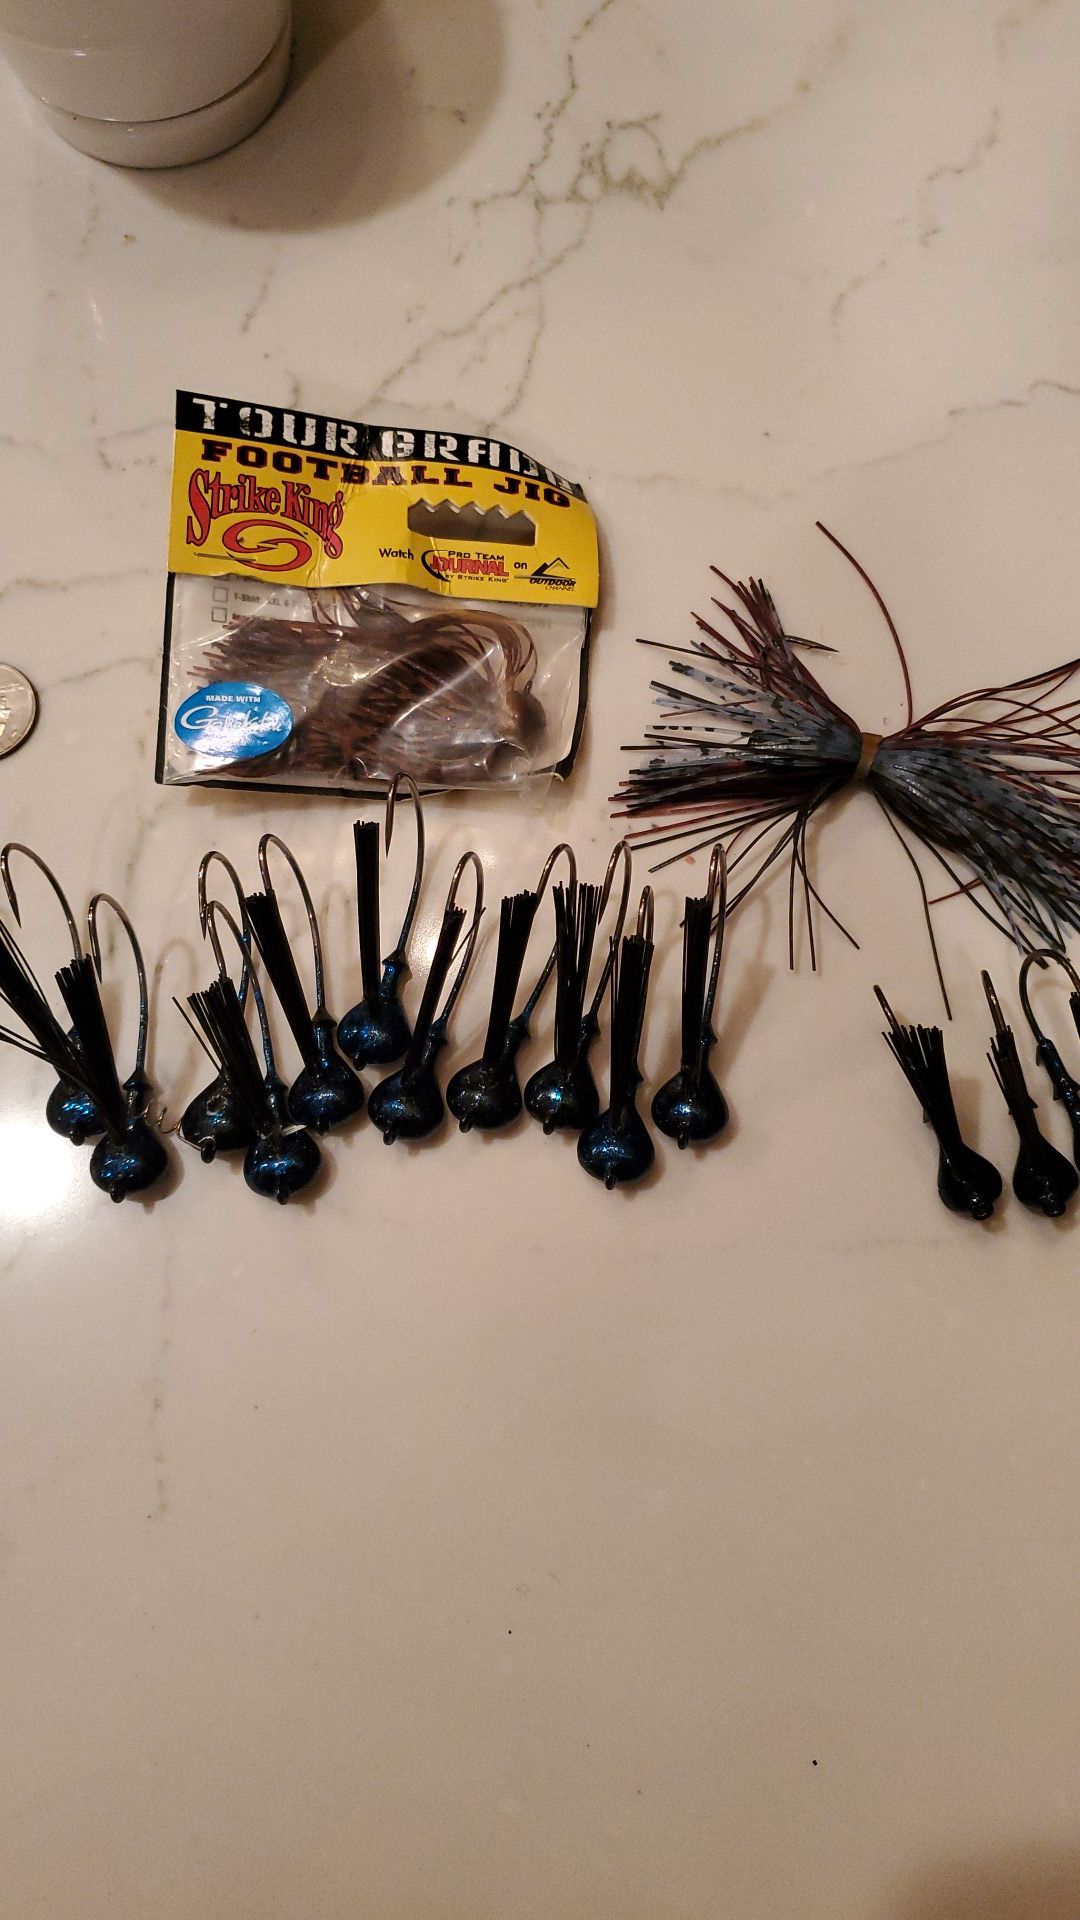 Fishing lures - misc. Jig heads